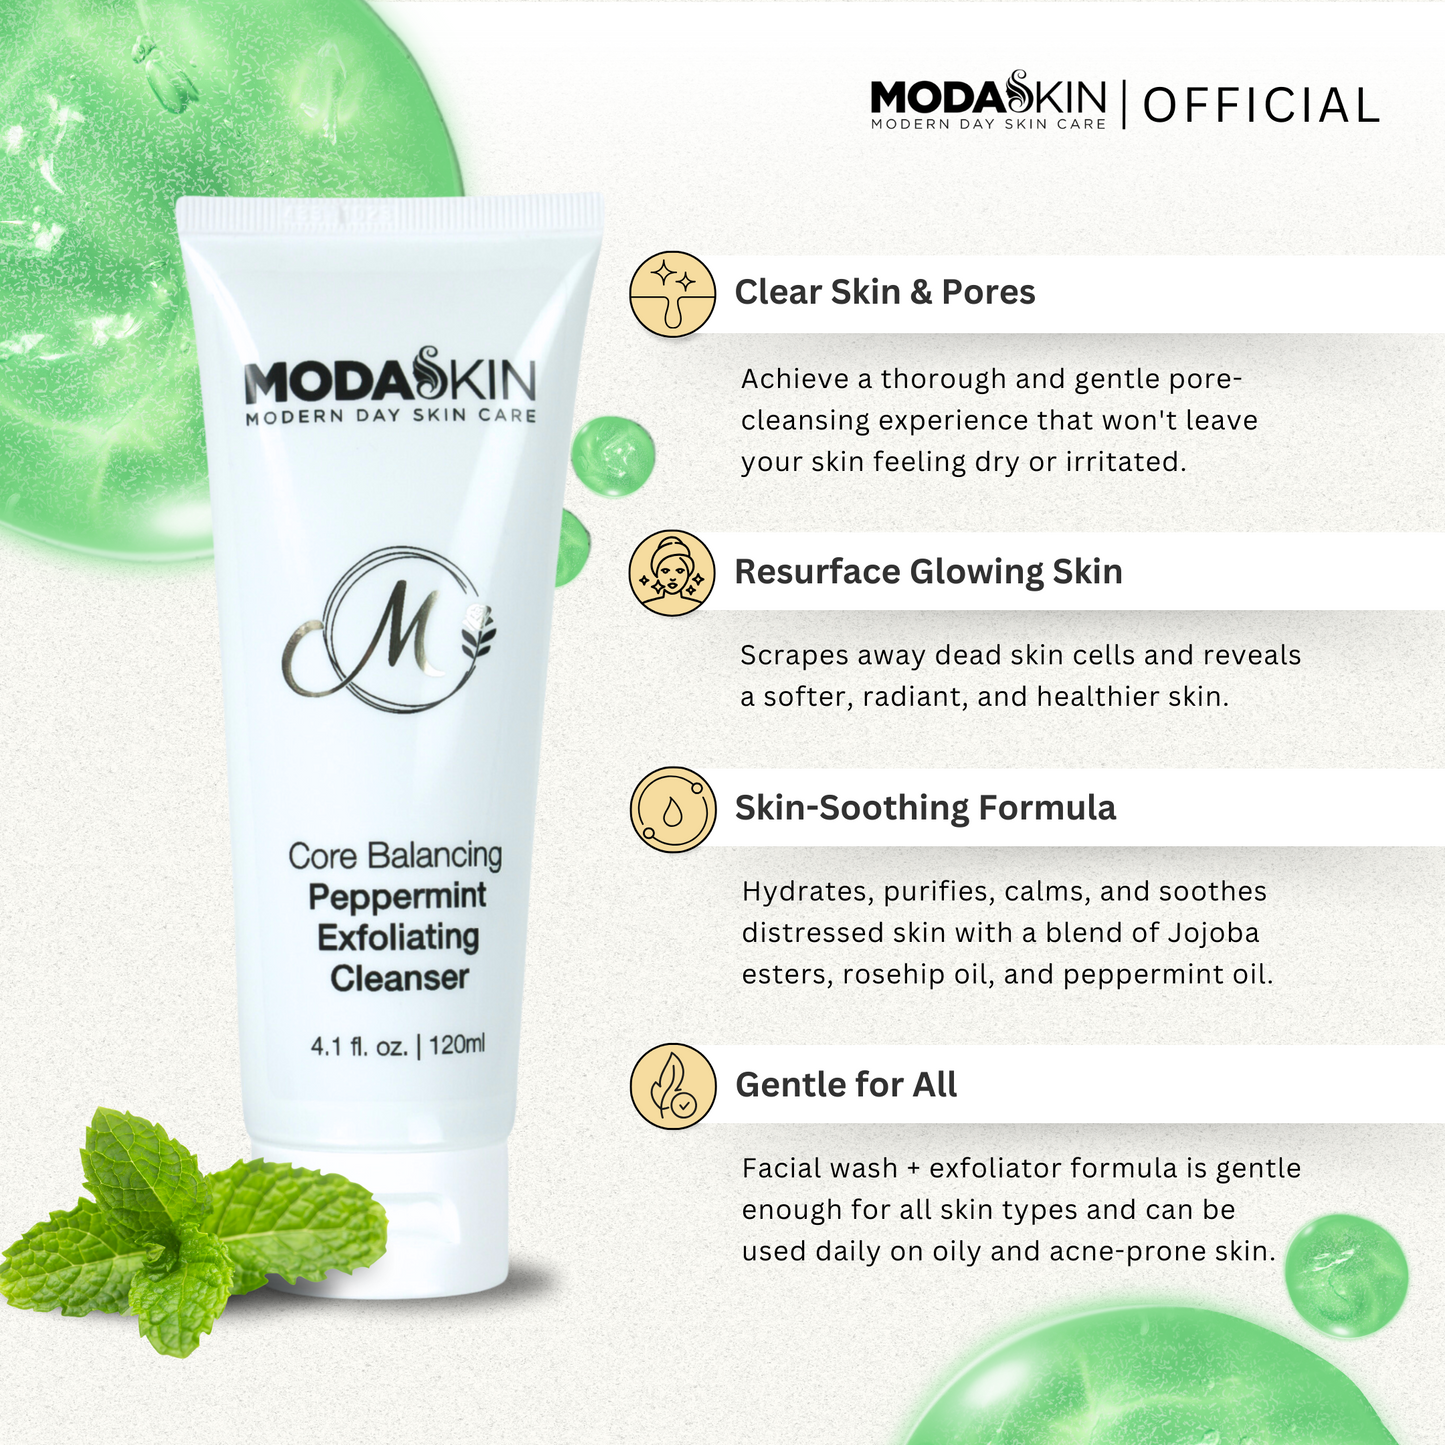 Core Balancing Peppermint Exfoliating Cleanser